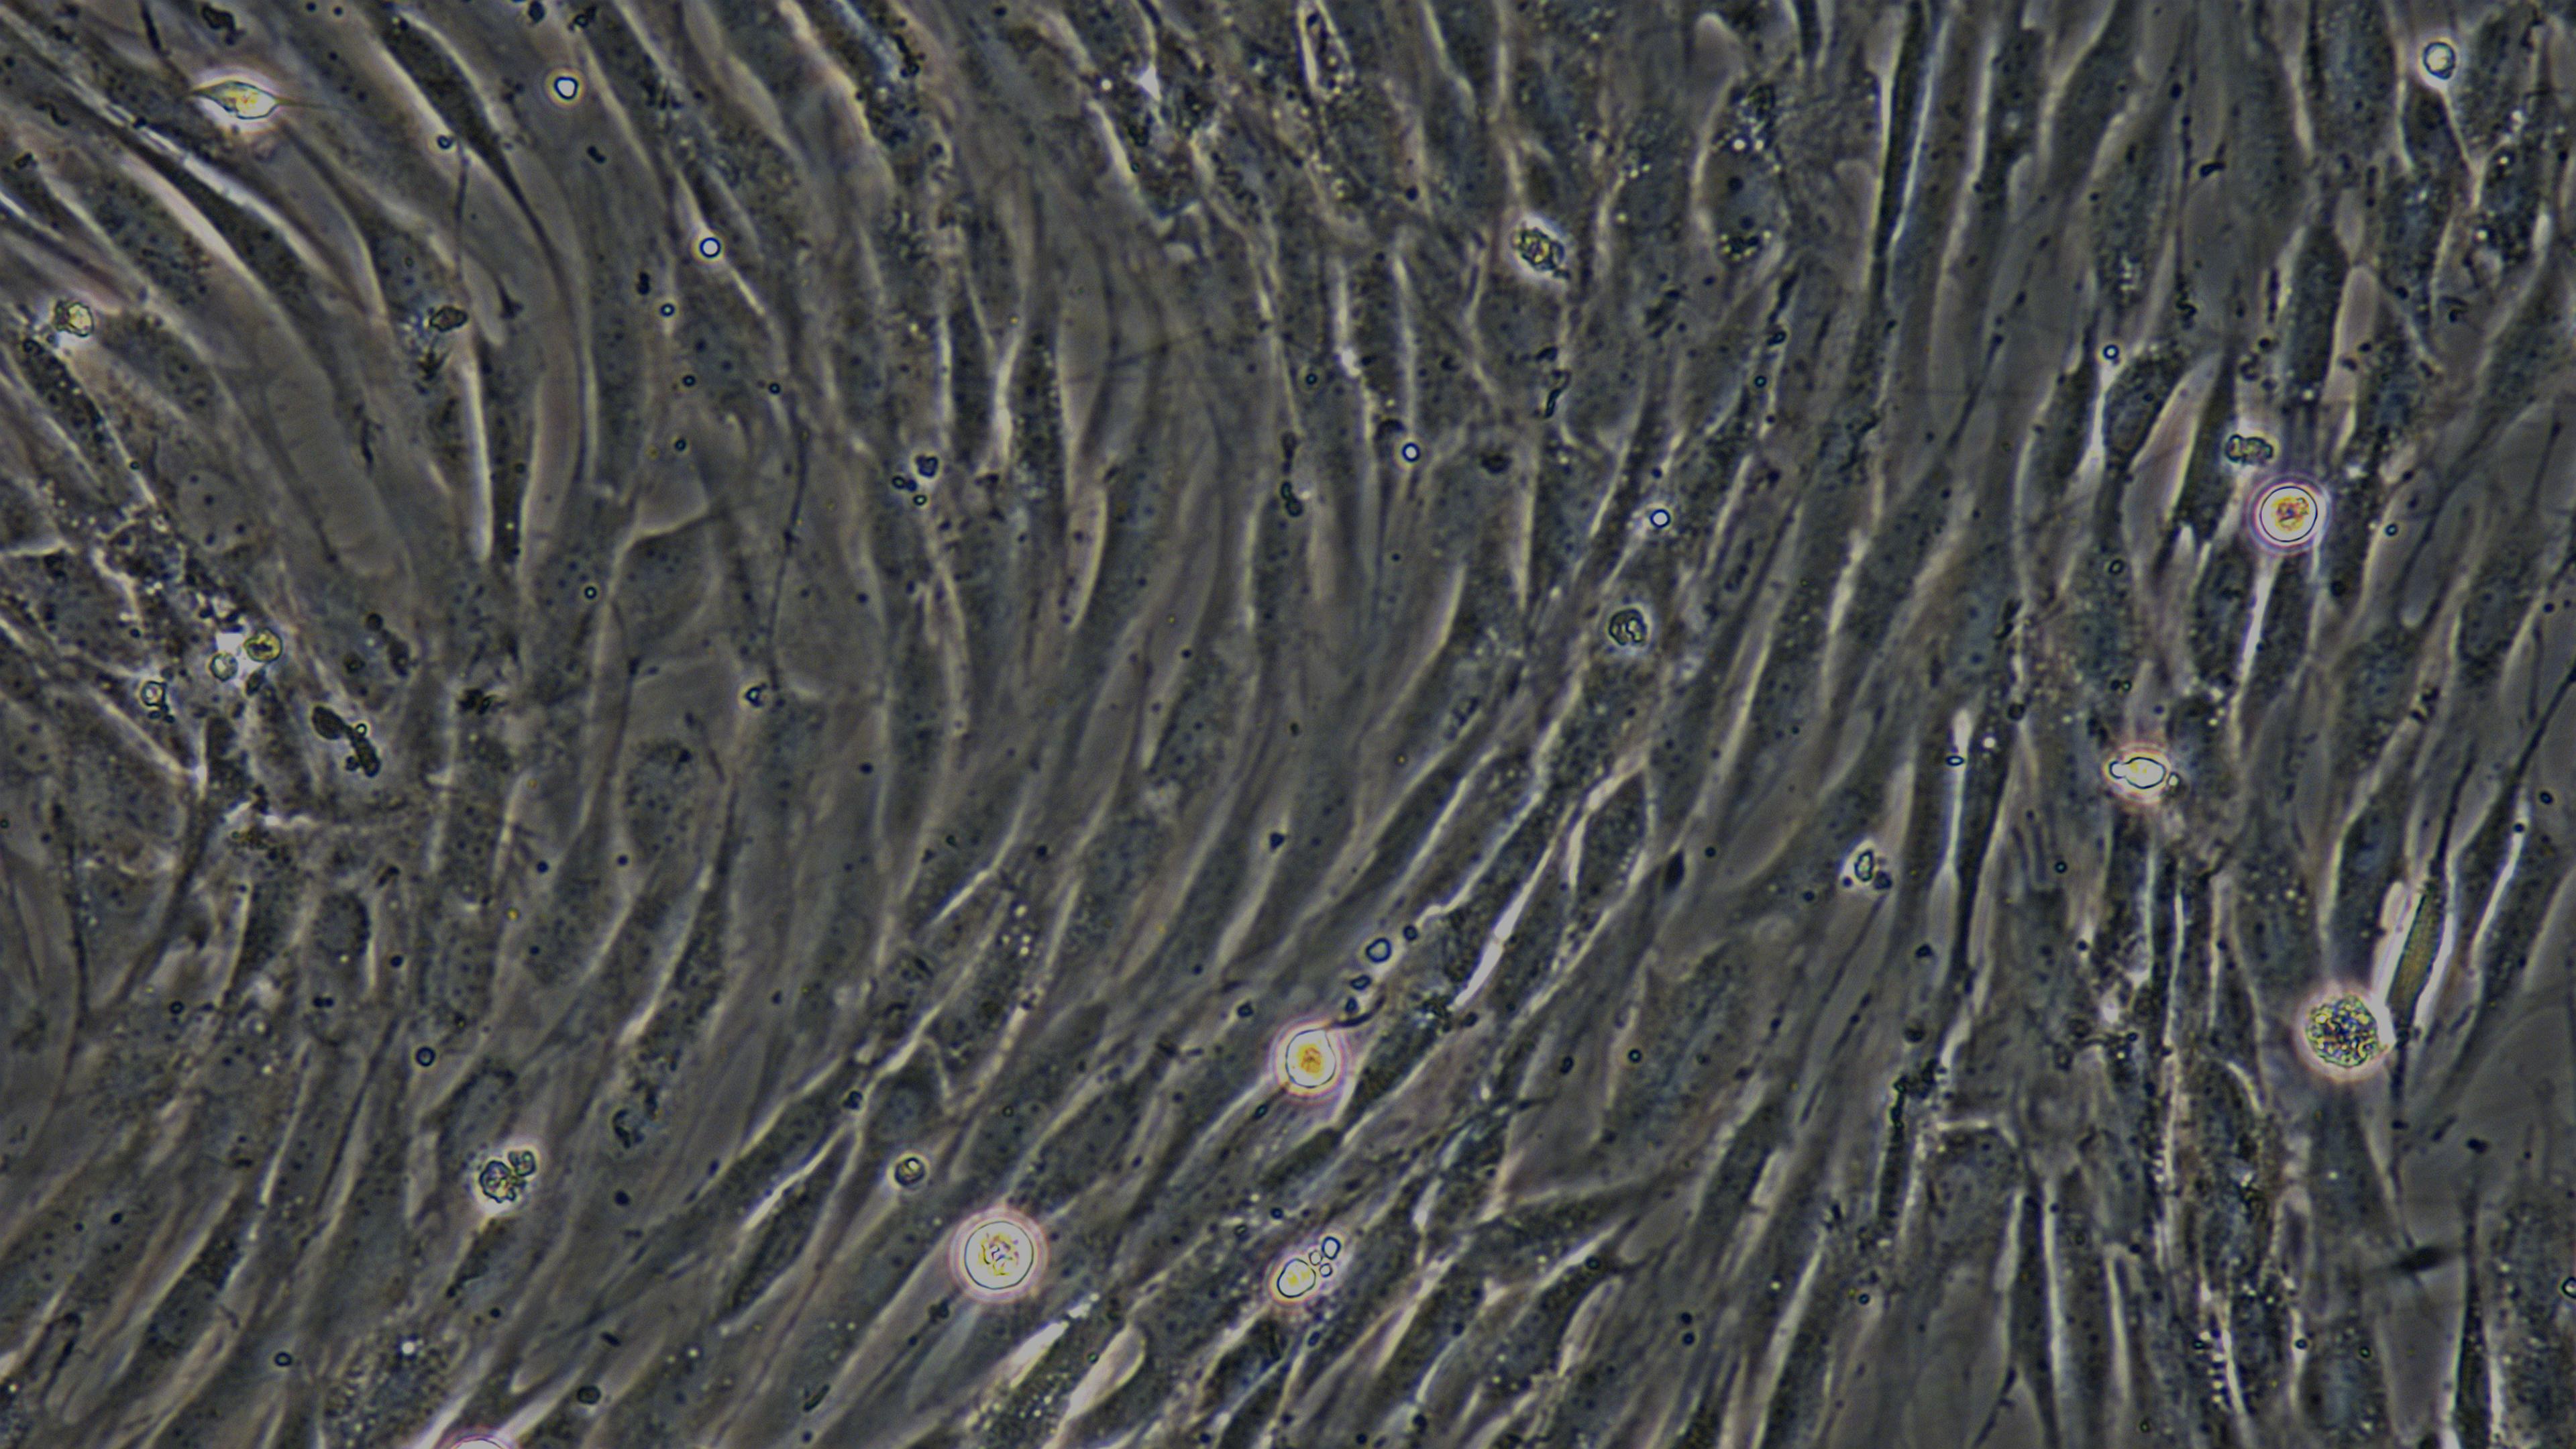 Primary Canine Synovial Cells (SYC)